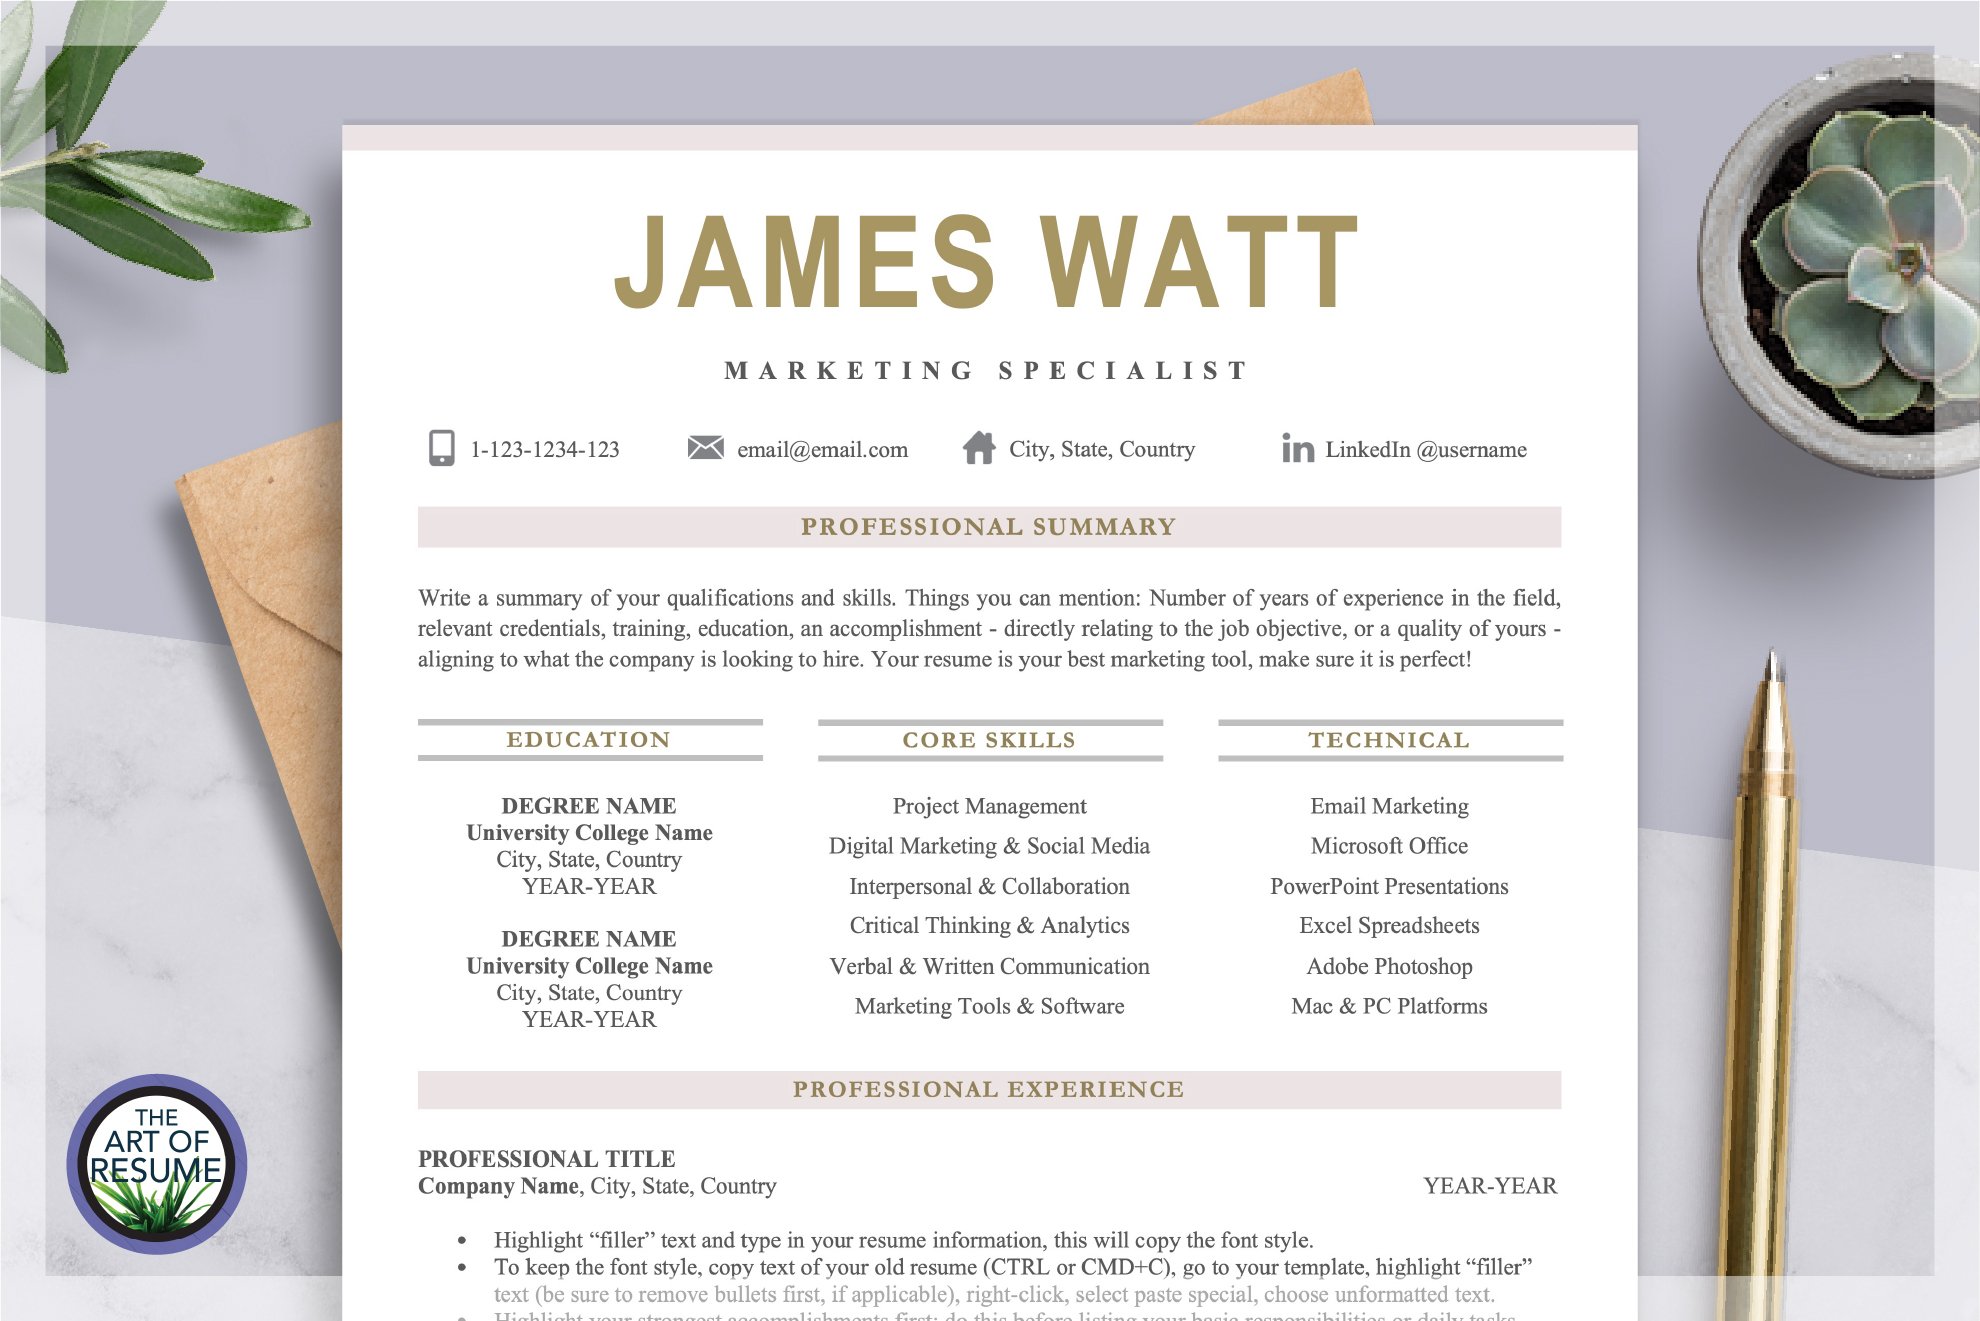 Resume Template | Free Cover Letter cover image.